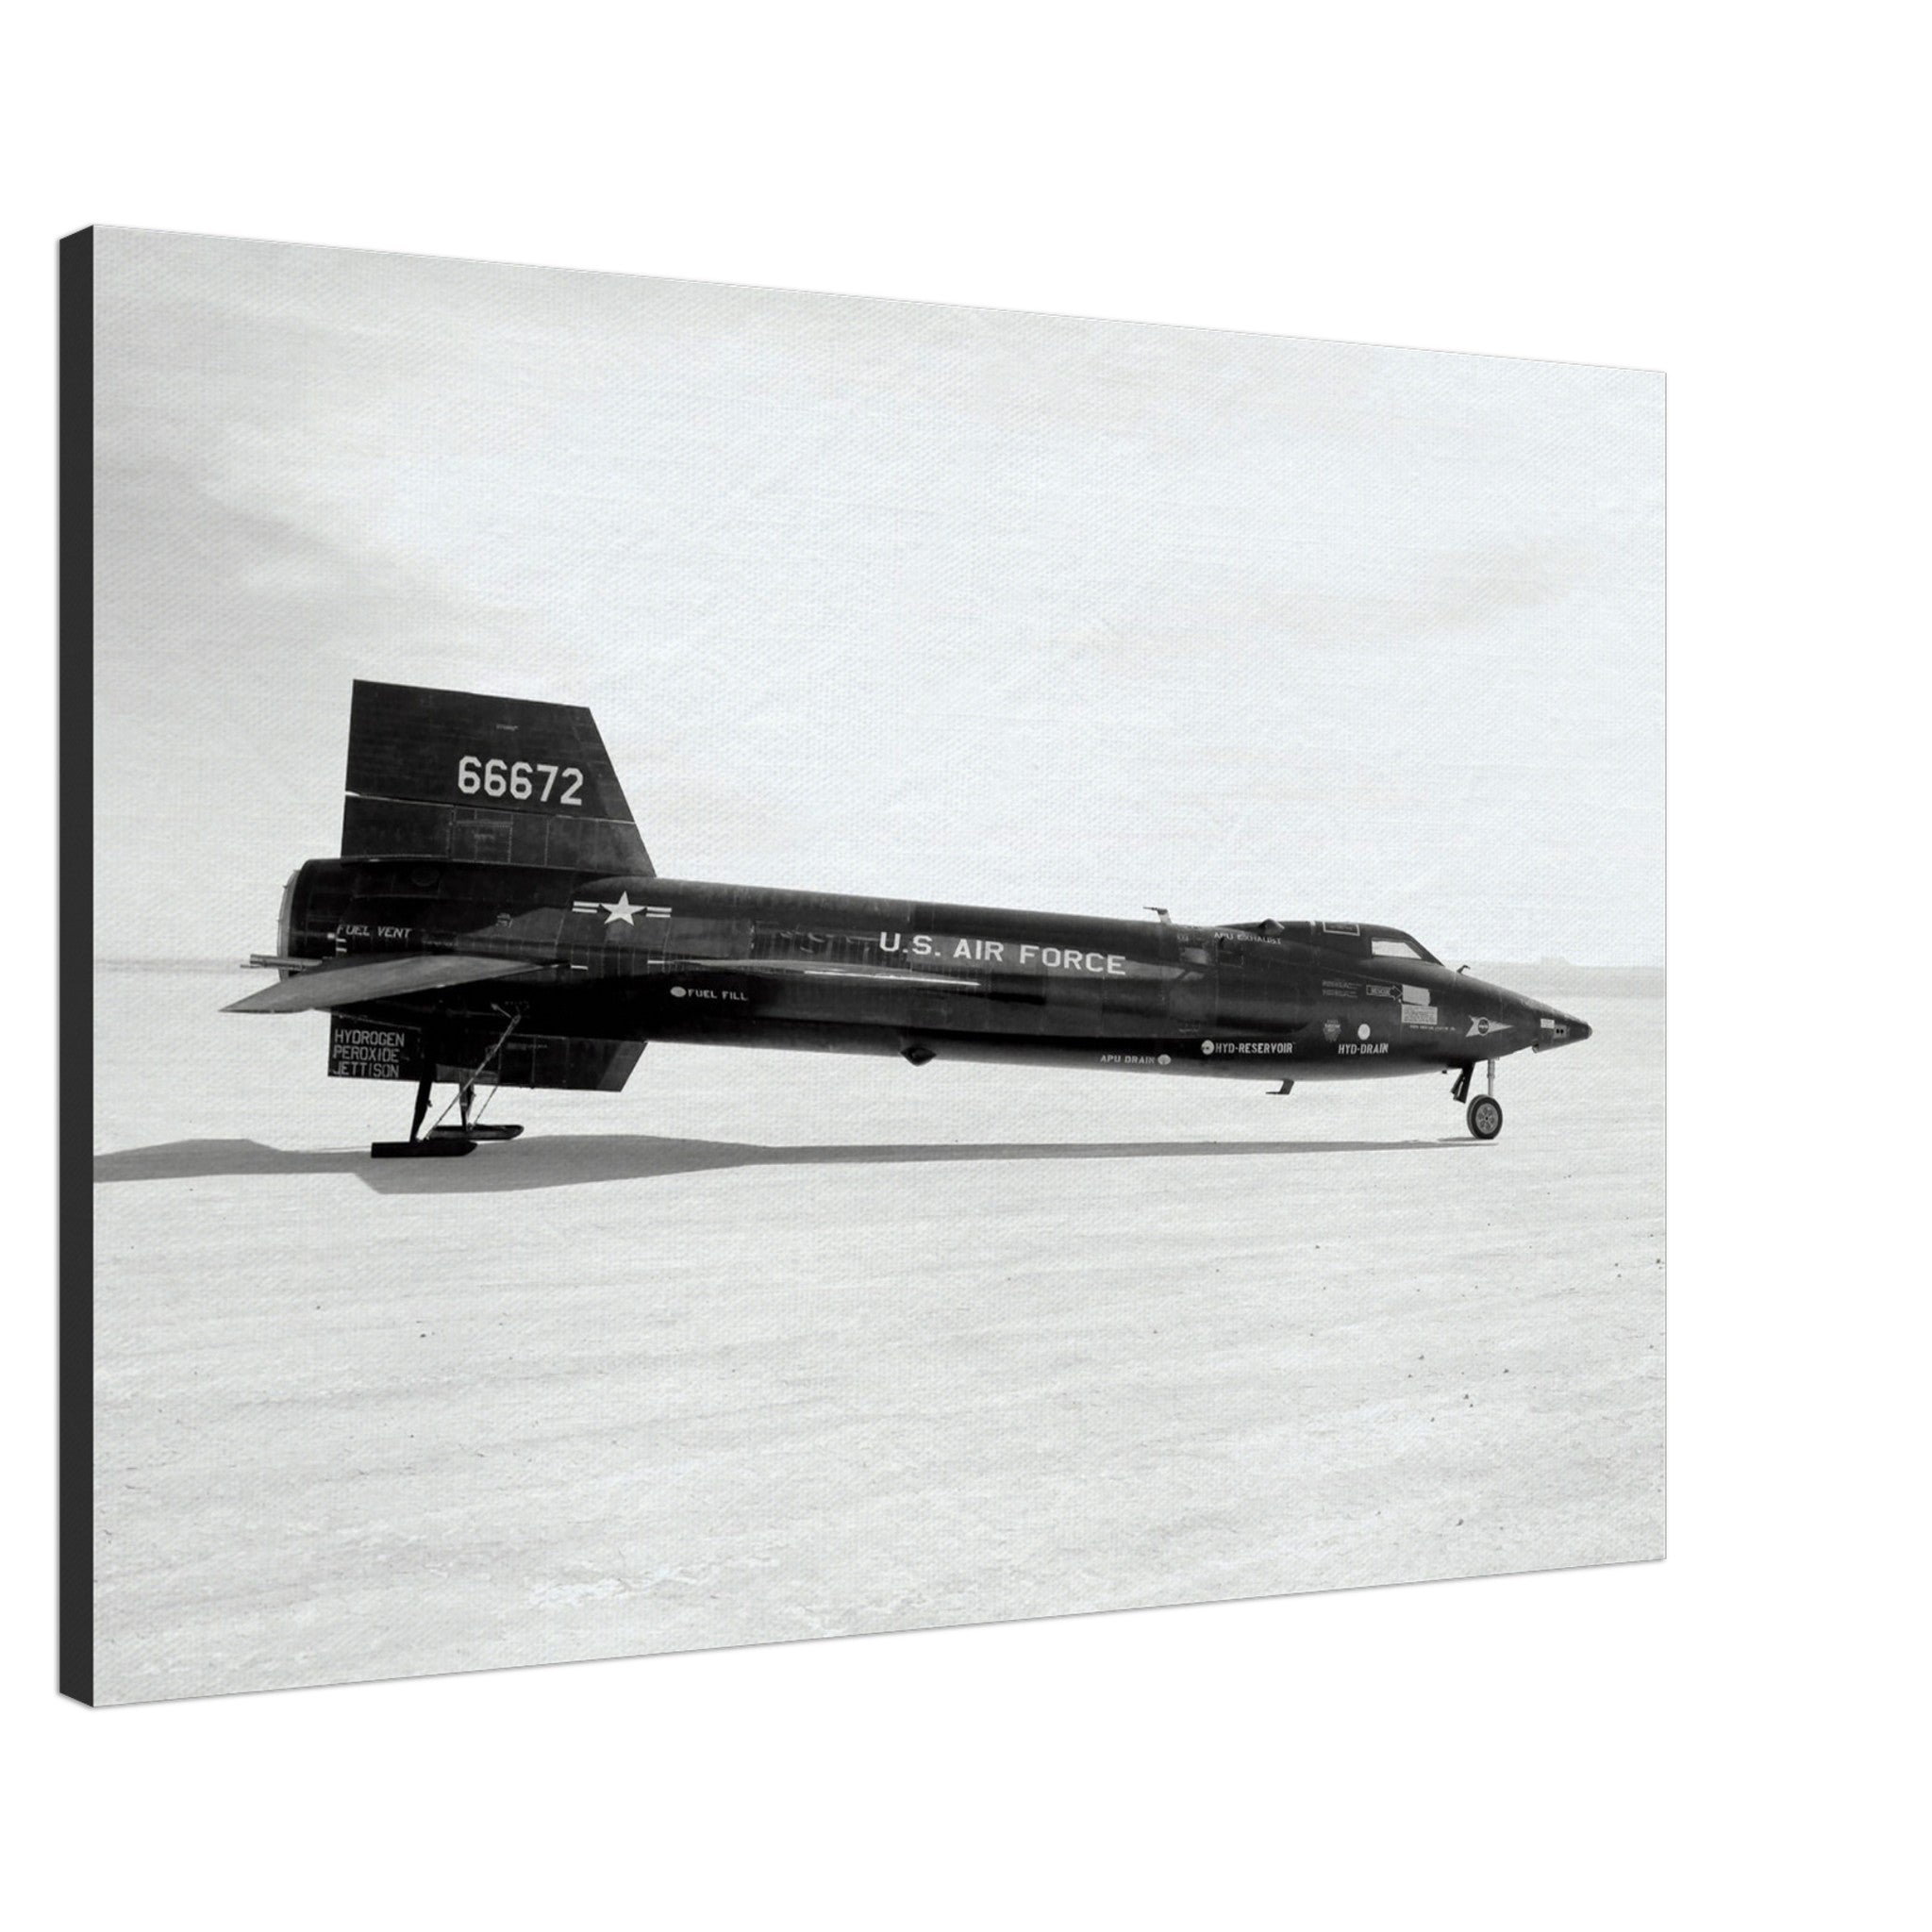 X-15 Side View on Canvas - I Love a Hangar